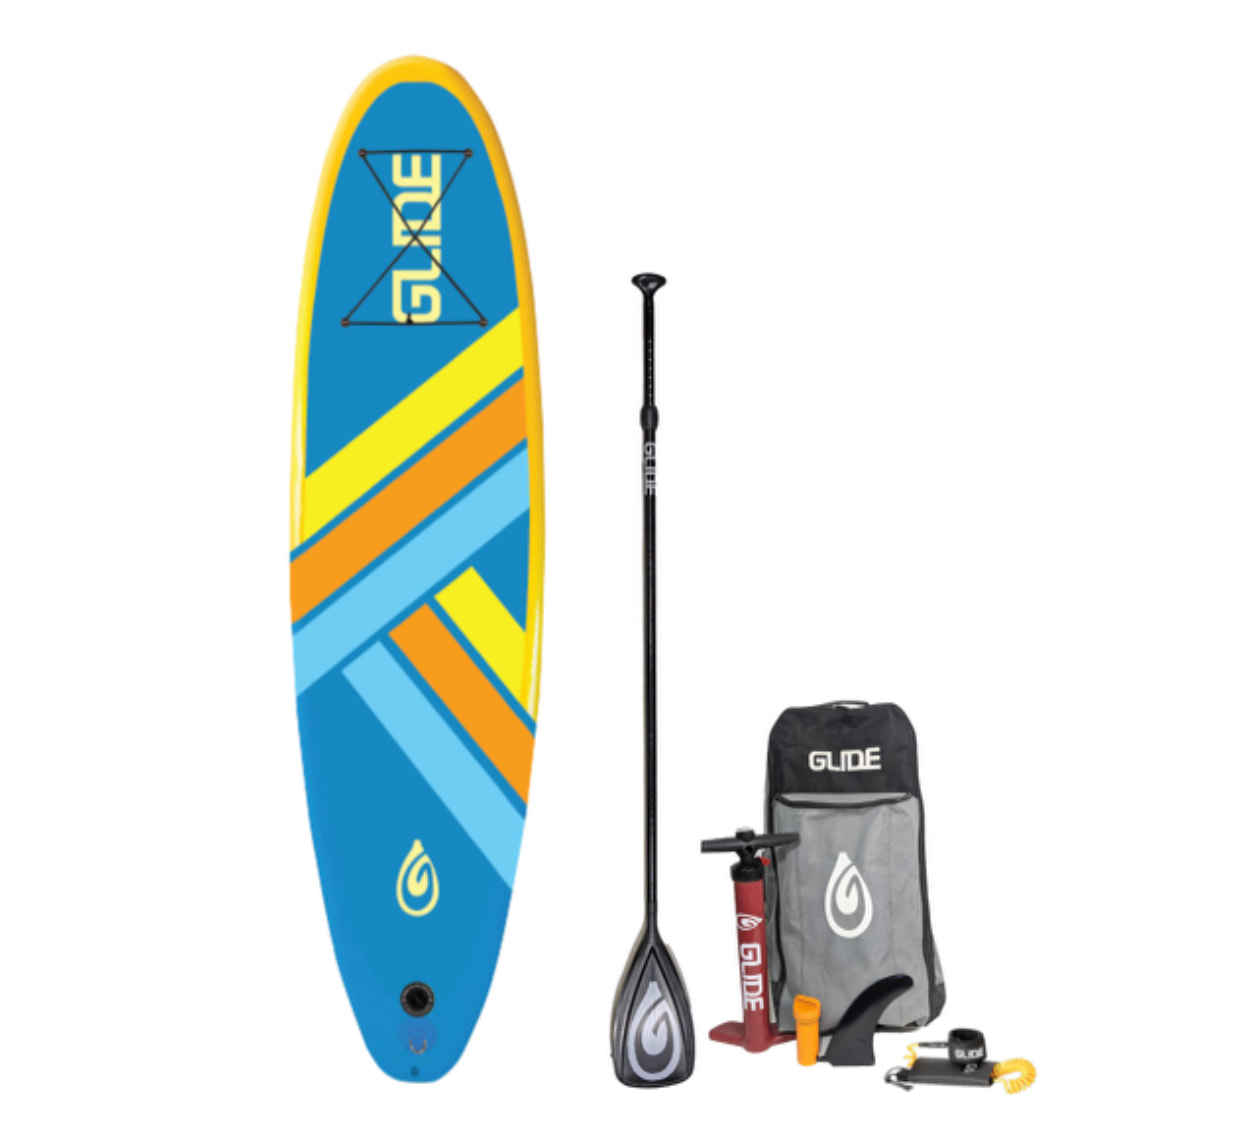 inflatable sups,isup,electric pump,attachment points,weight limit,flat water,stand up paddle boards,inflatable sup